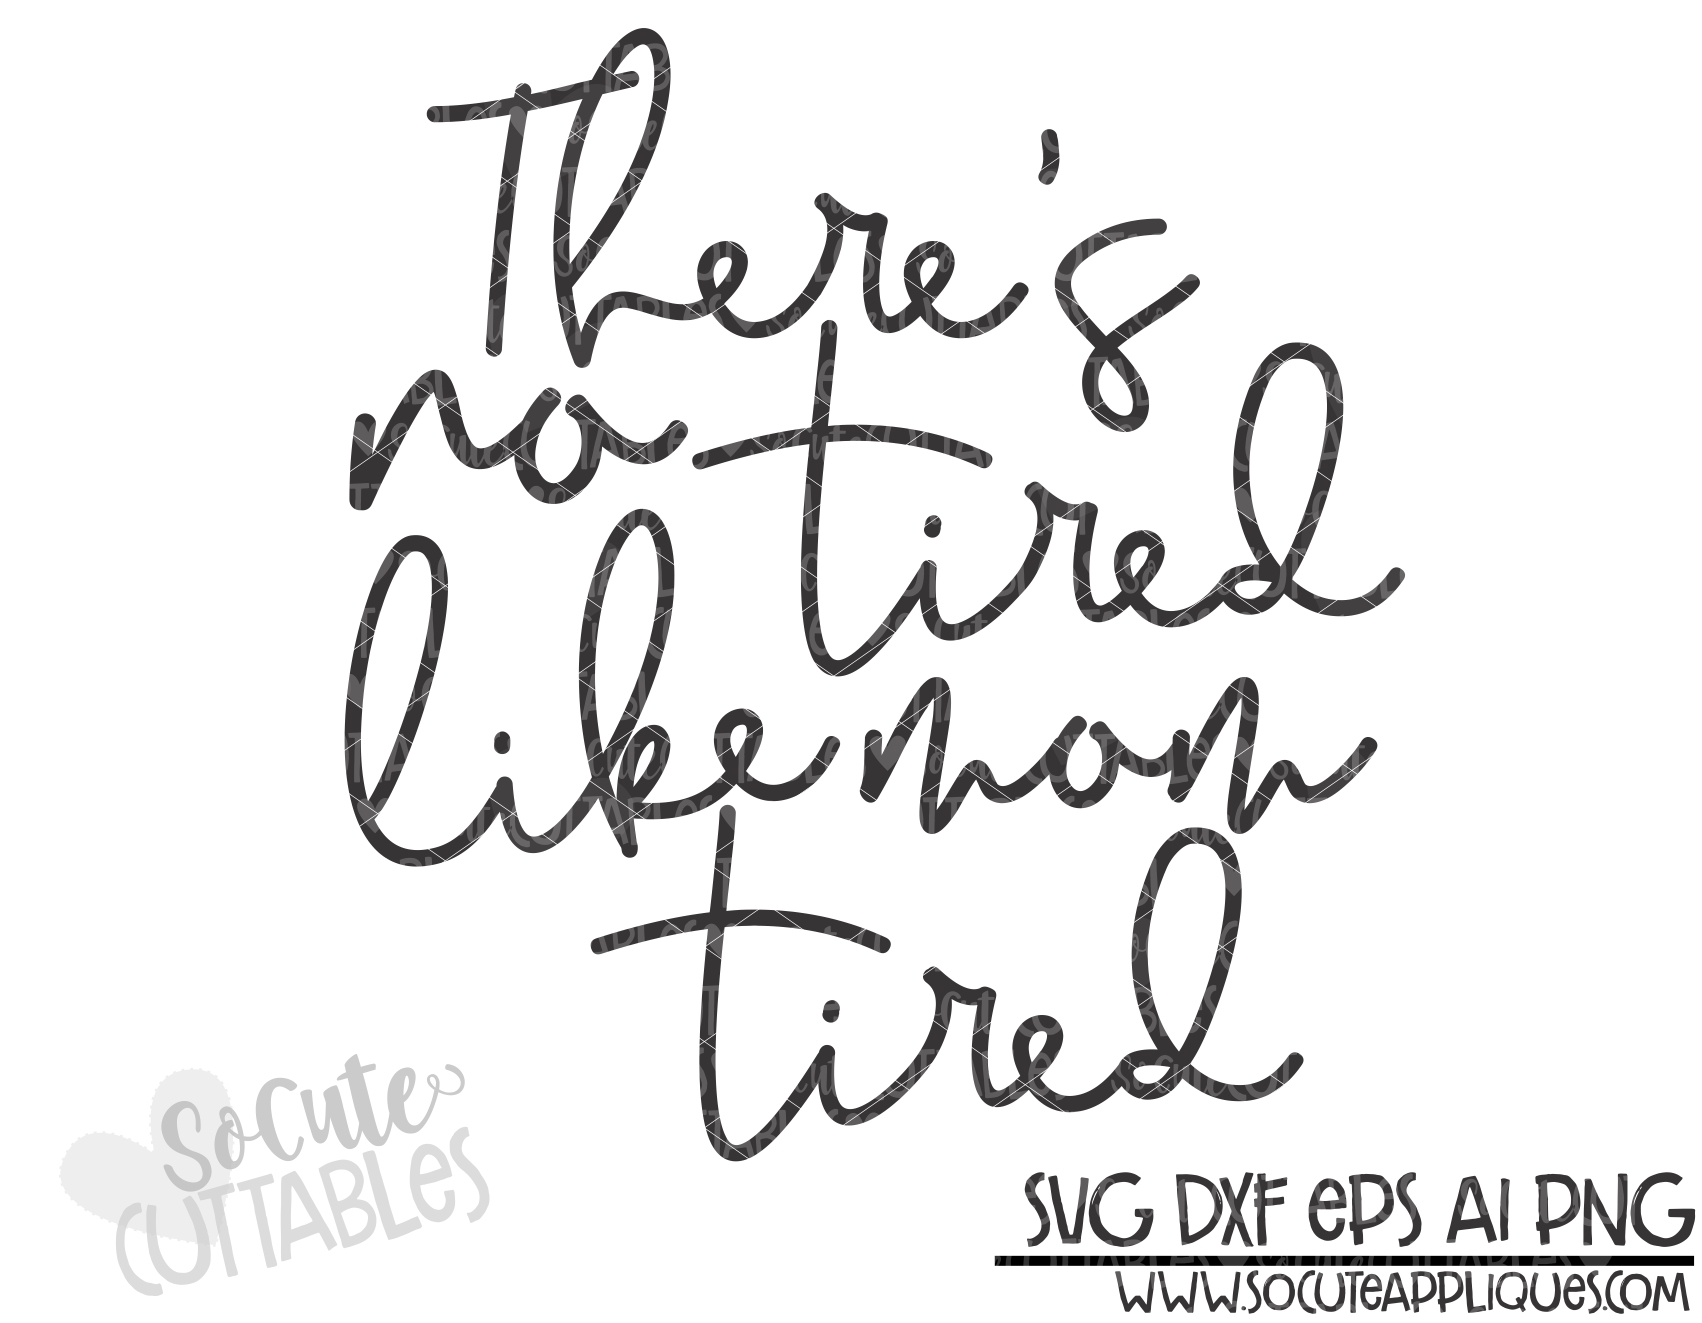 Theres No Tired Like Mom Tired 19 Scc Svg Socuteappliques Net